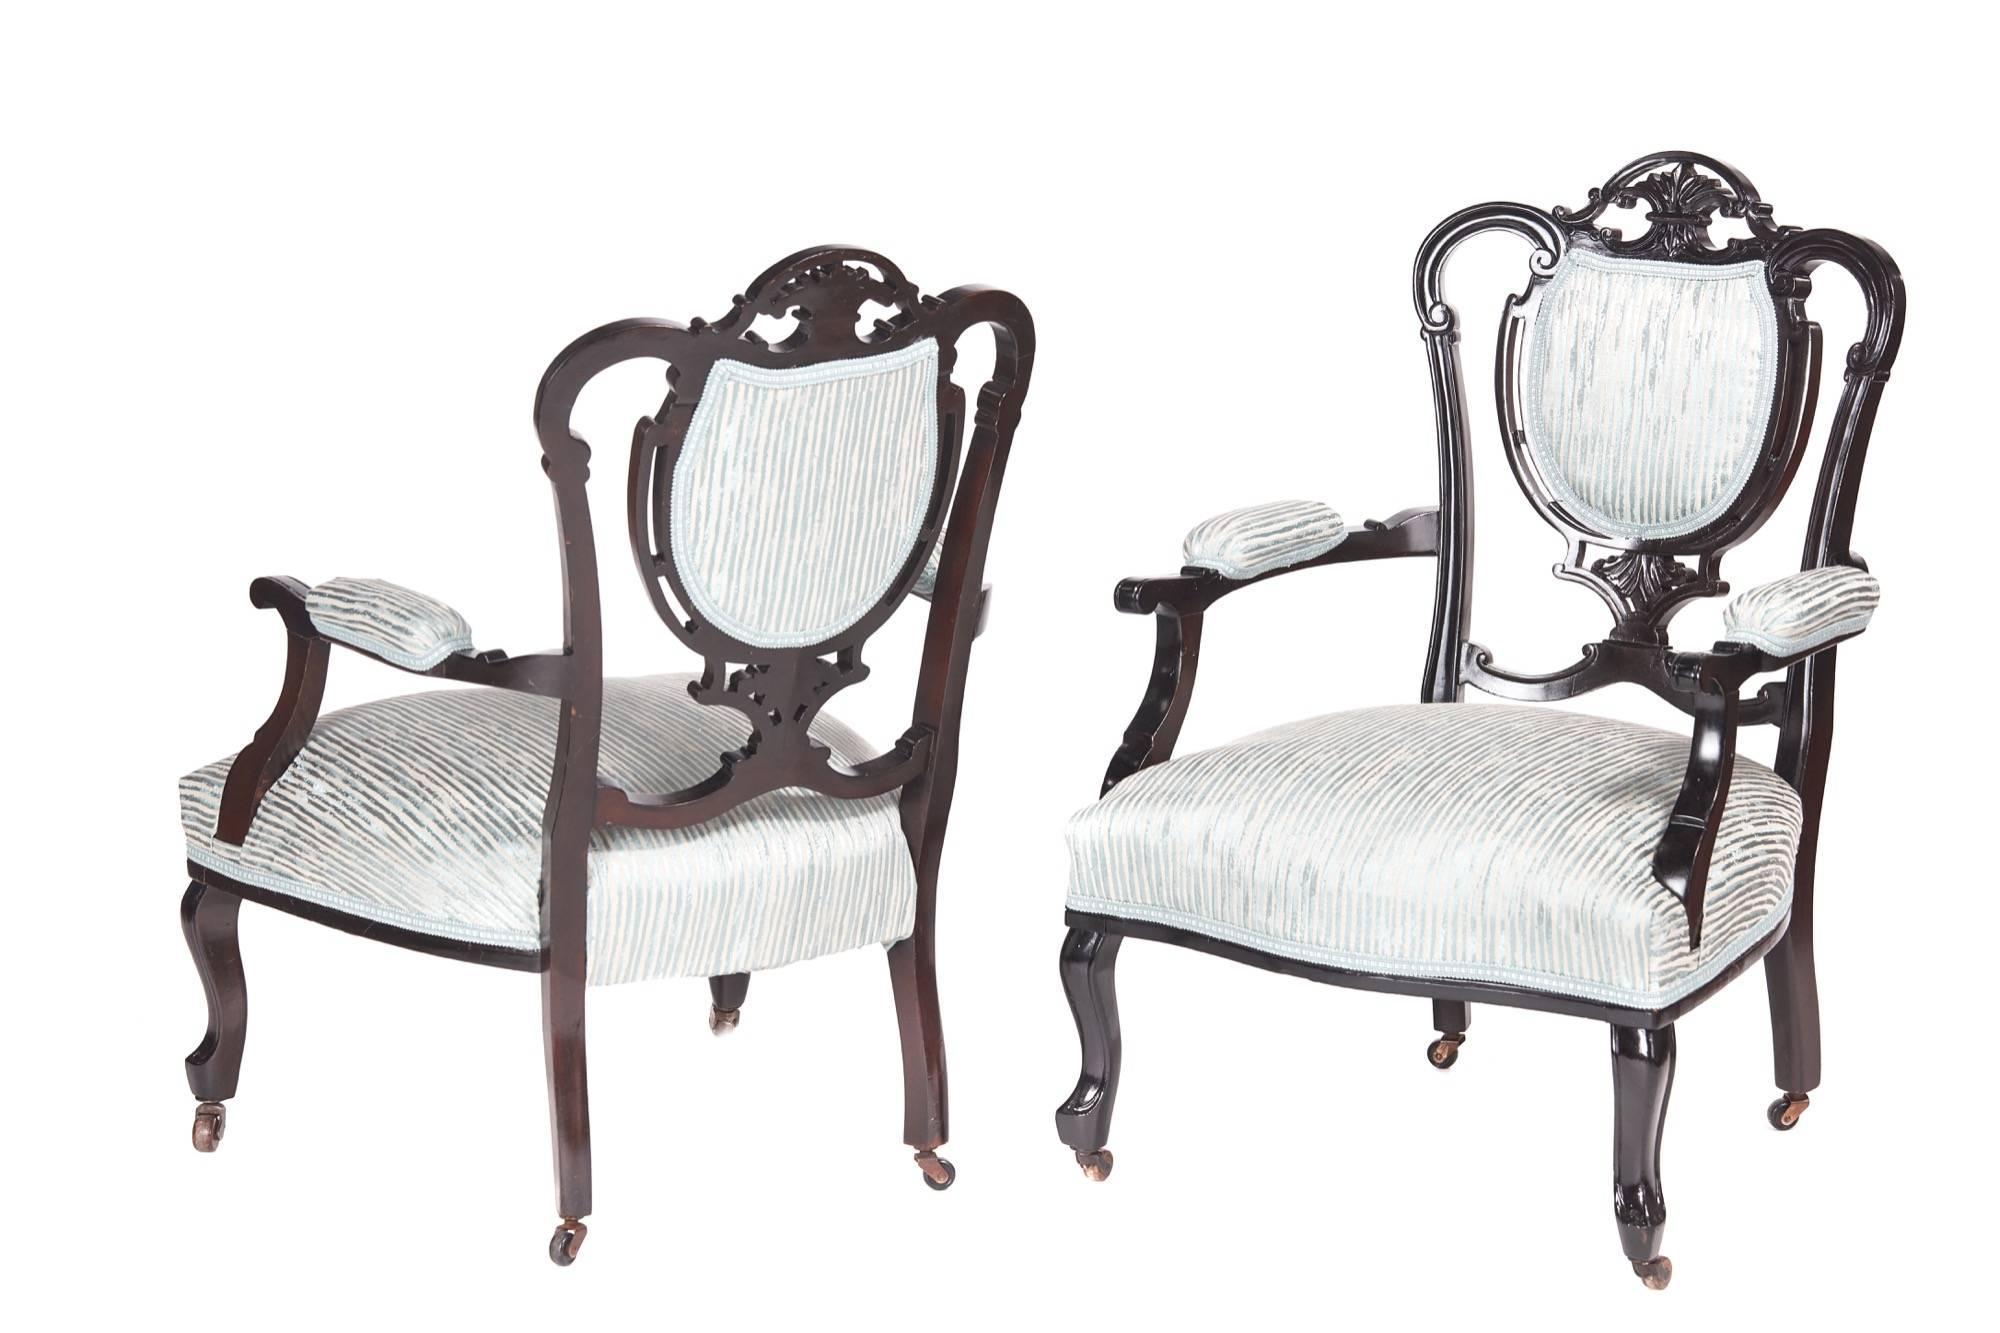 Pair of Victorian carved black lacquered library chairs, with lovely carved shaped backs, shaped open arms, standing on cabriole legs to the front outswept back legs original castors
Newly re-upholstered
Lovely color and condition
Measure: 24